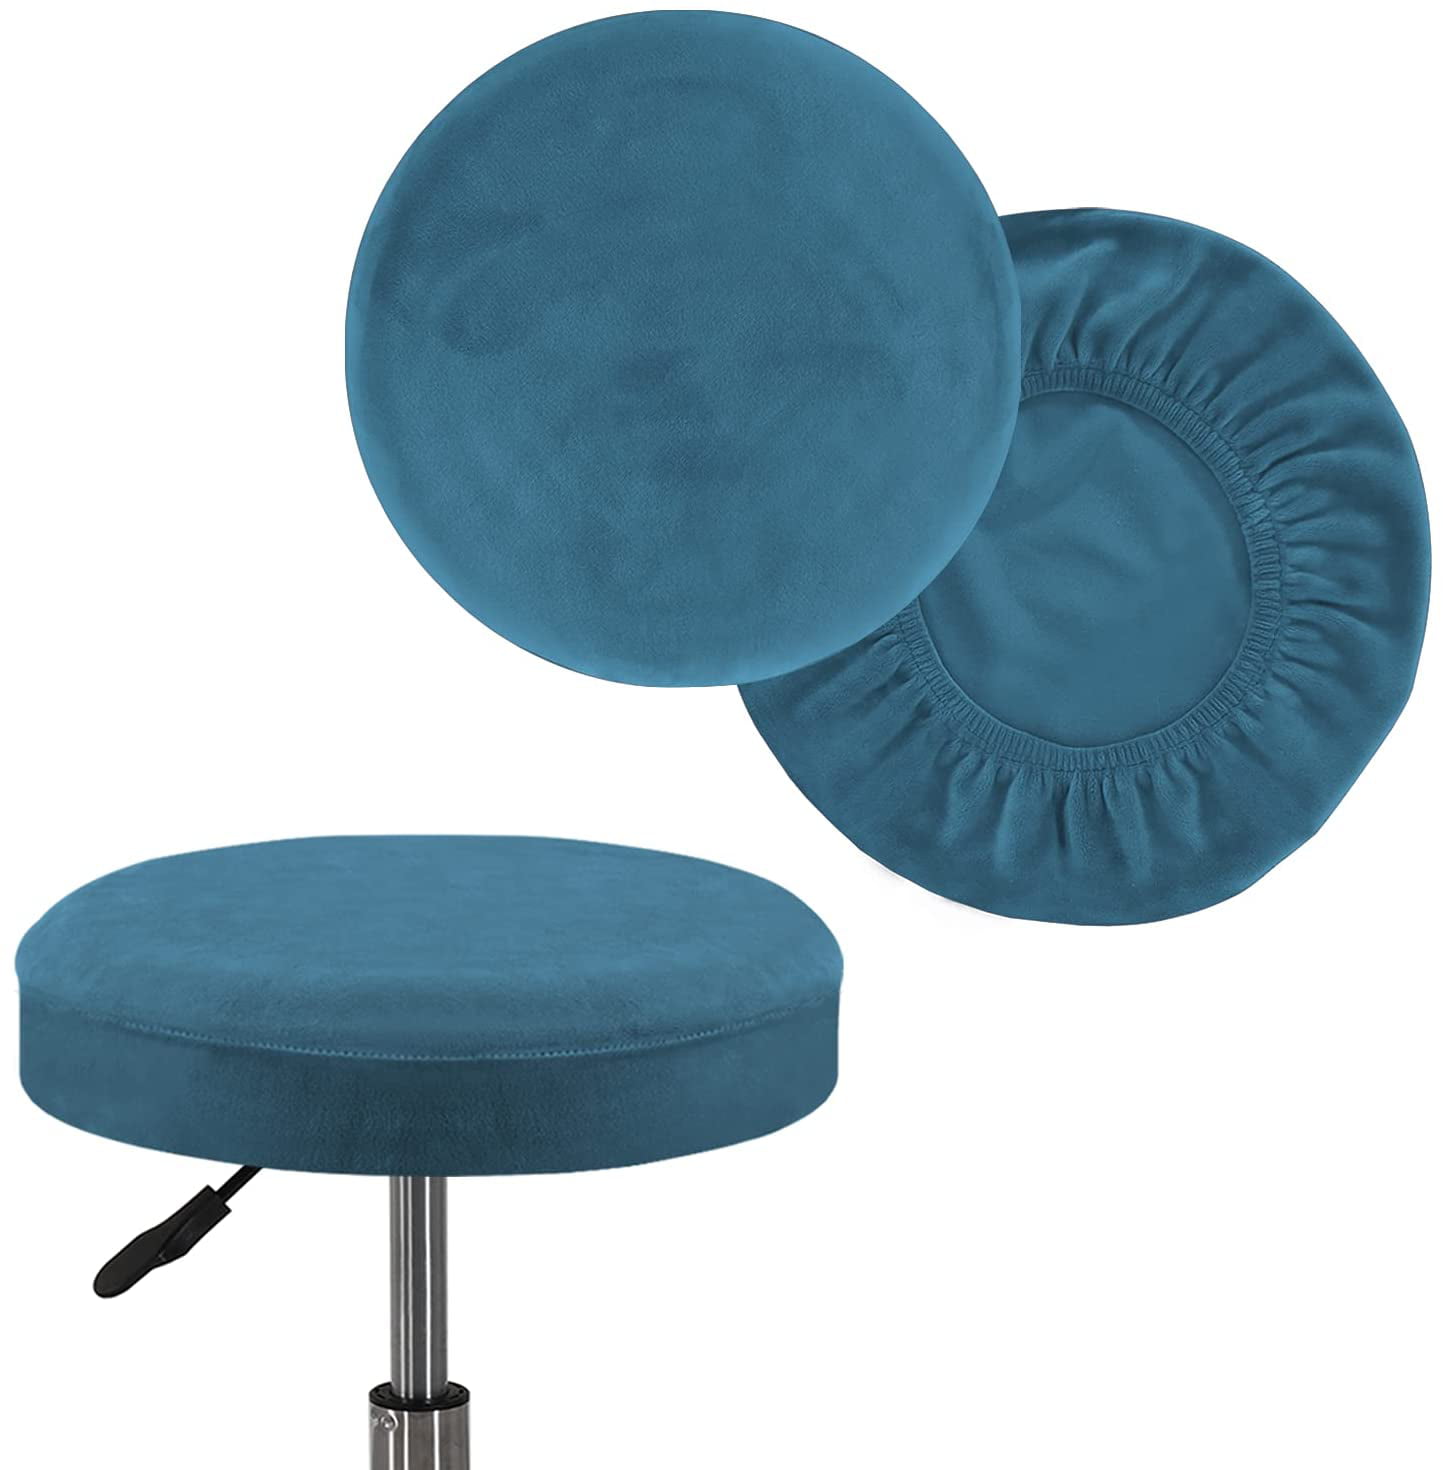 Details about   Bar Stool Cover Round Chair Cover Washable Elastic Stool Cushion Slipcover 